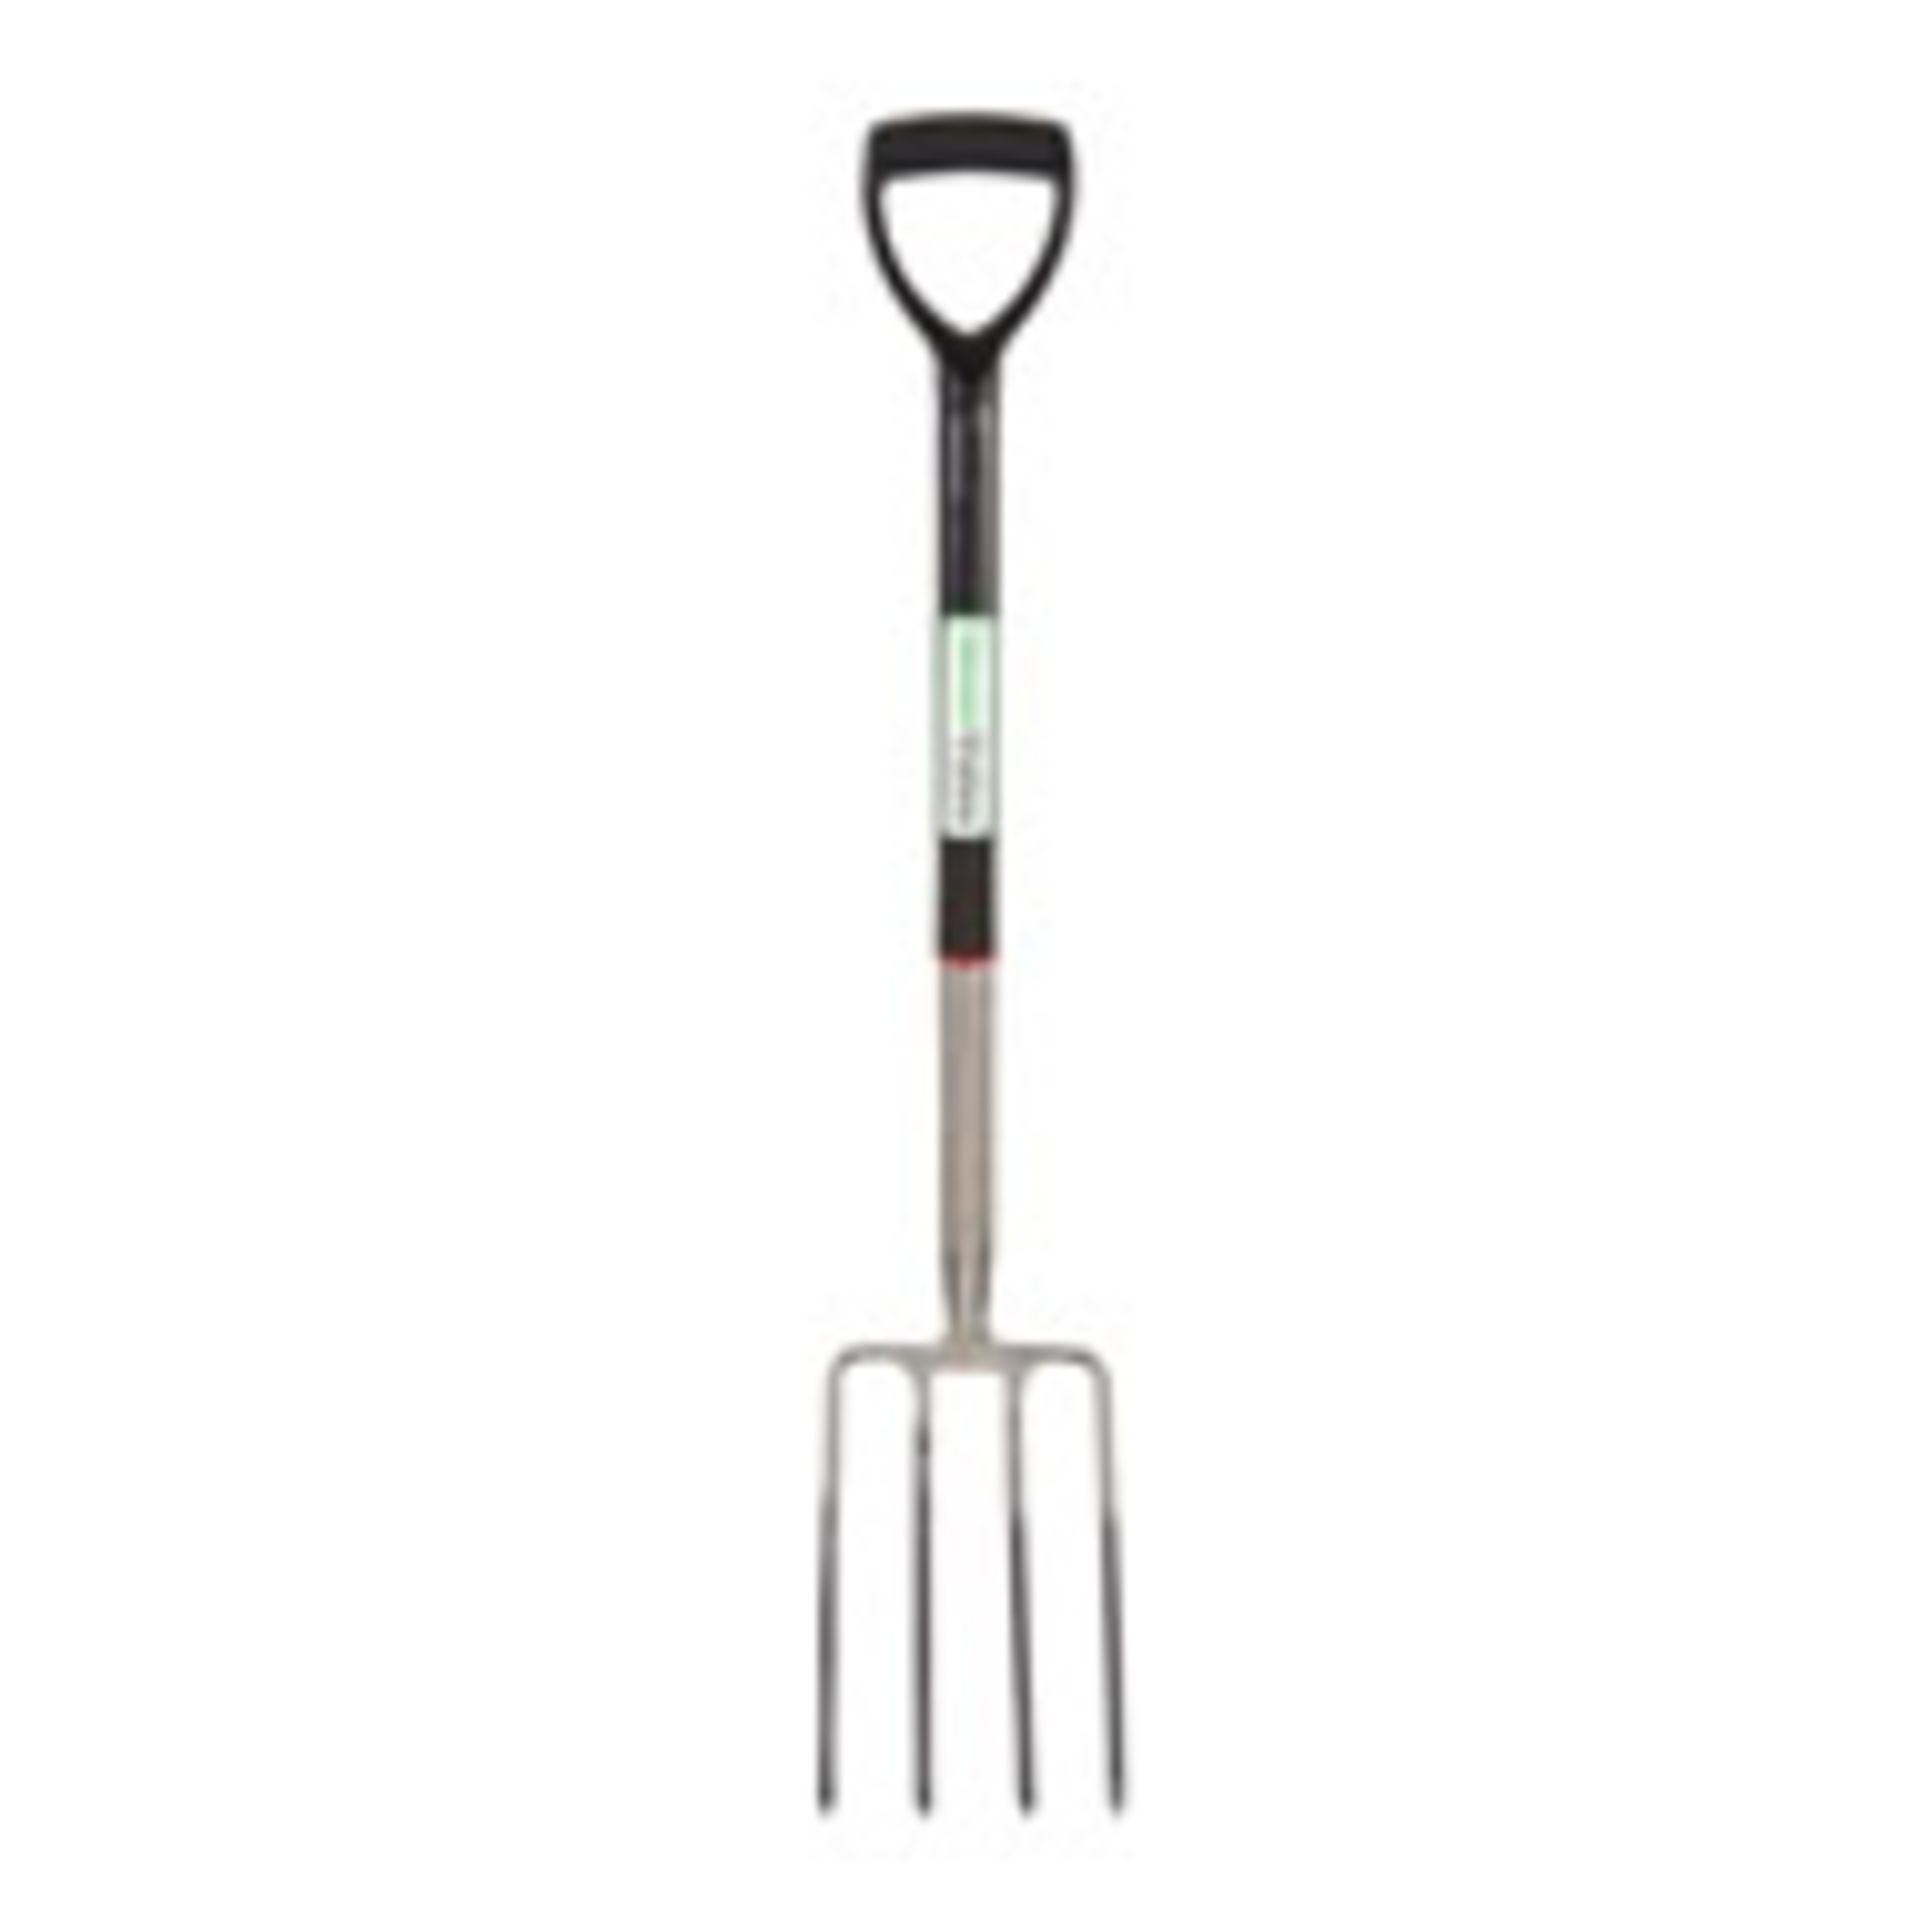 V Grade A Green Valley Stainless Steel Garden Fork With Poly Hilt ISP£39.99 X 2 Bid price to be